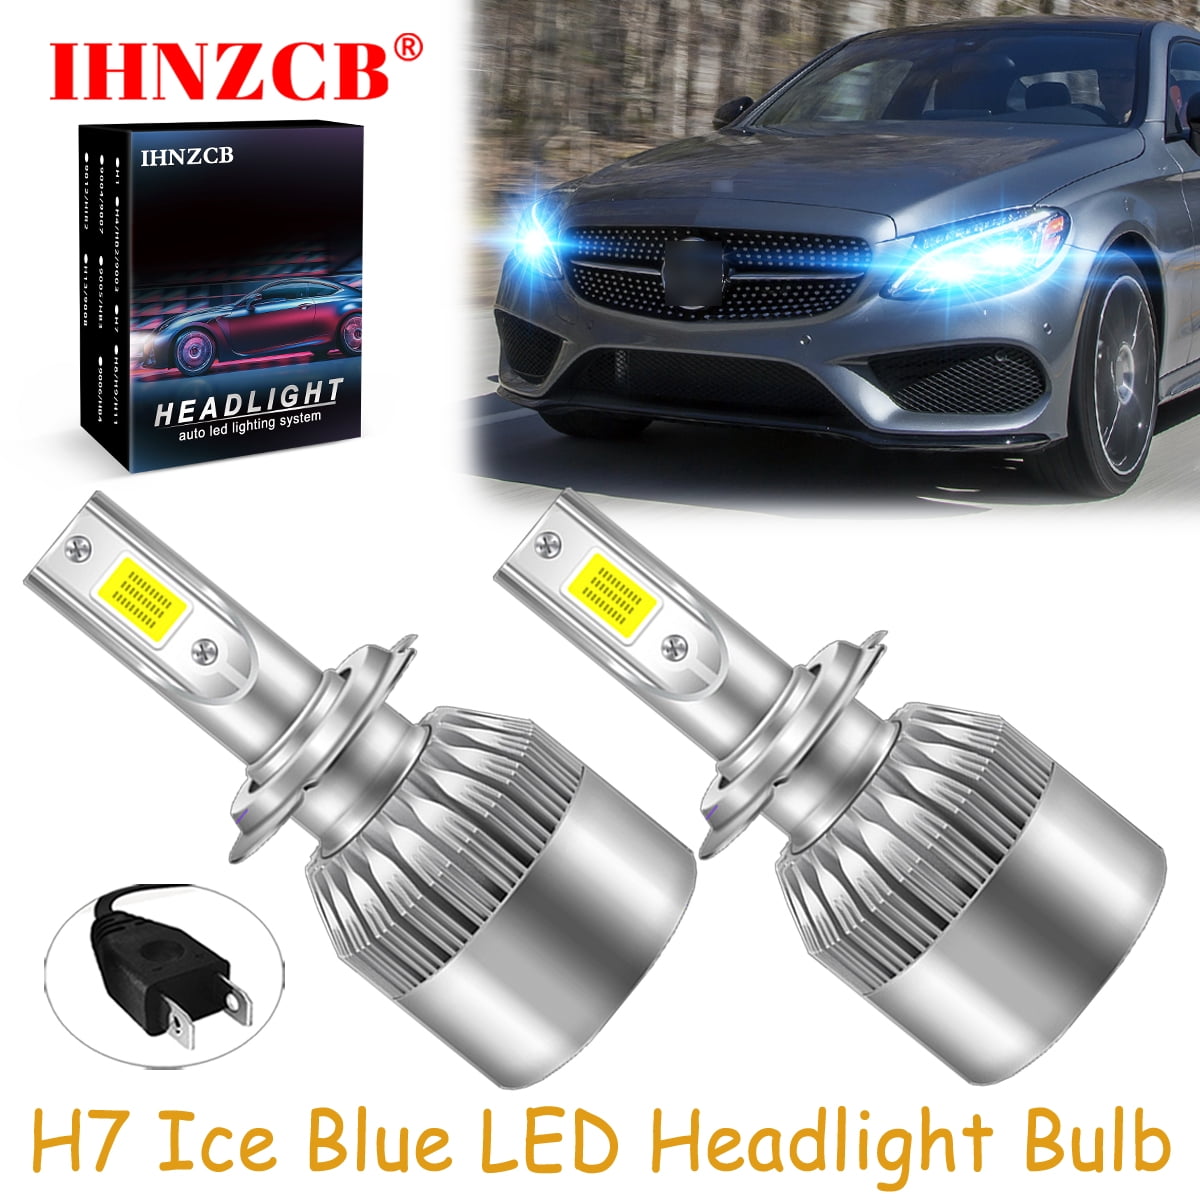 Mr Benz Zambia - H6 H7 Bosch bulbs available for that high